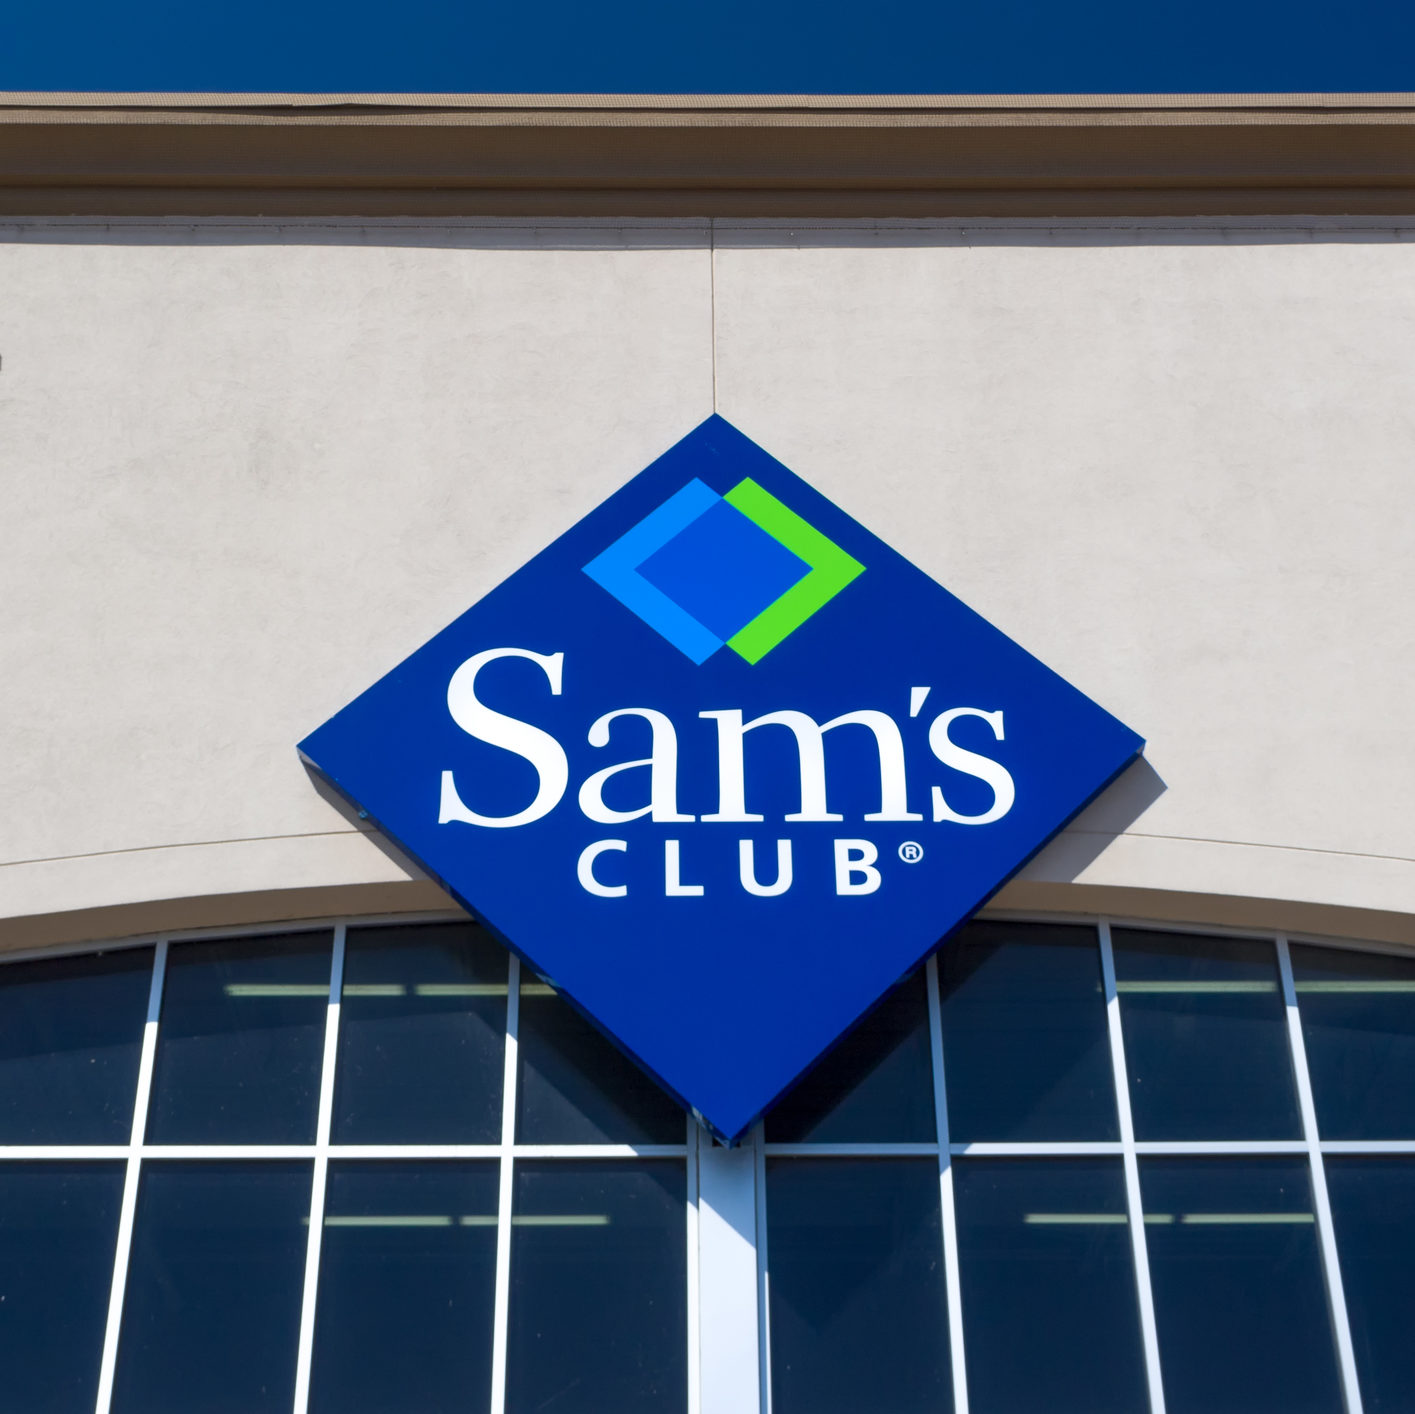 Join Sam's Club – Become A Member Today! - Sam's Club